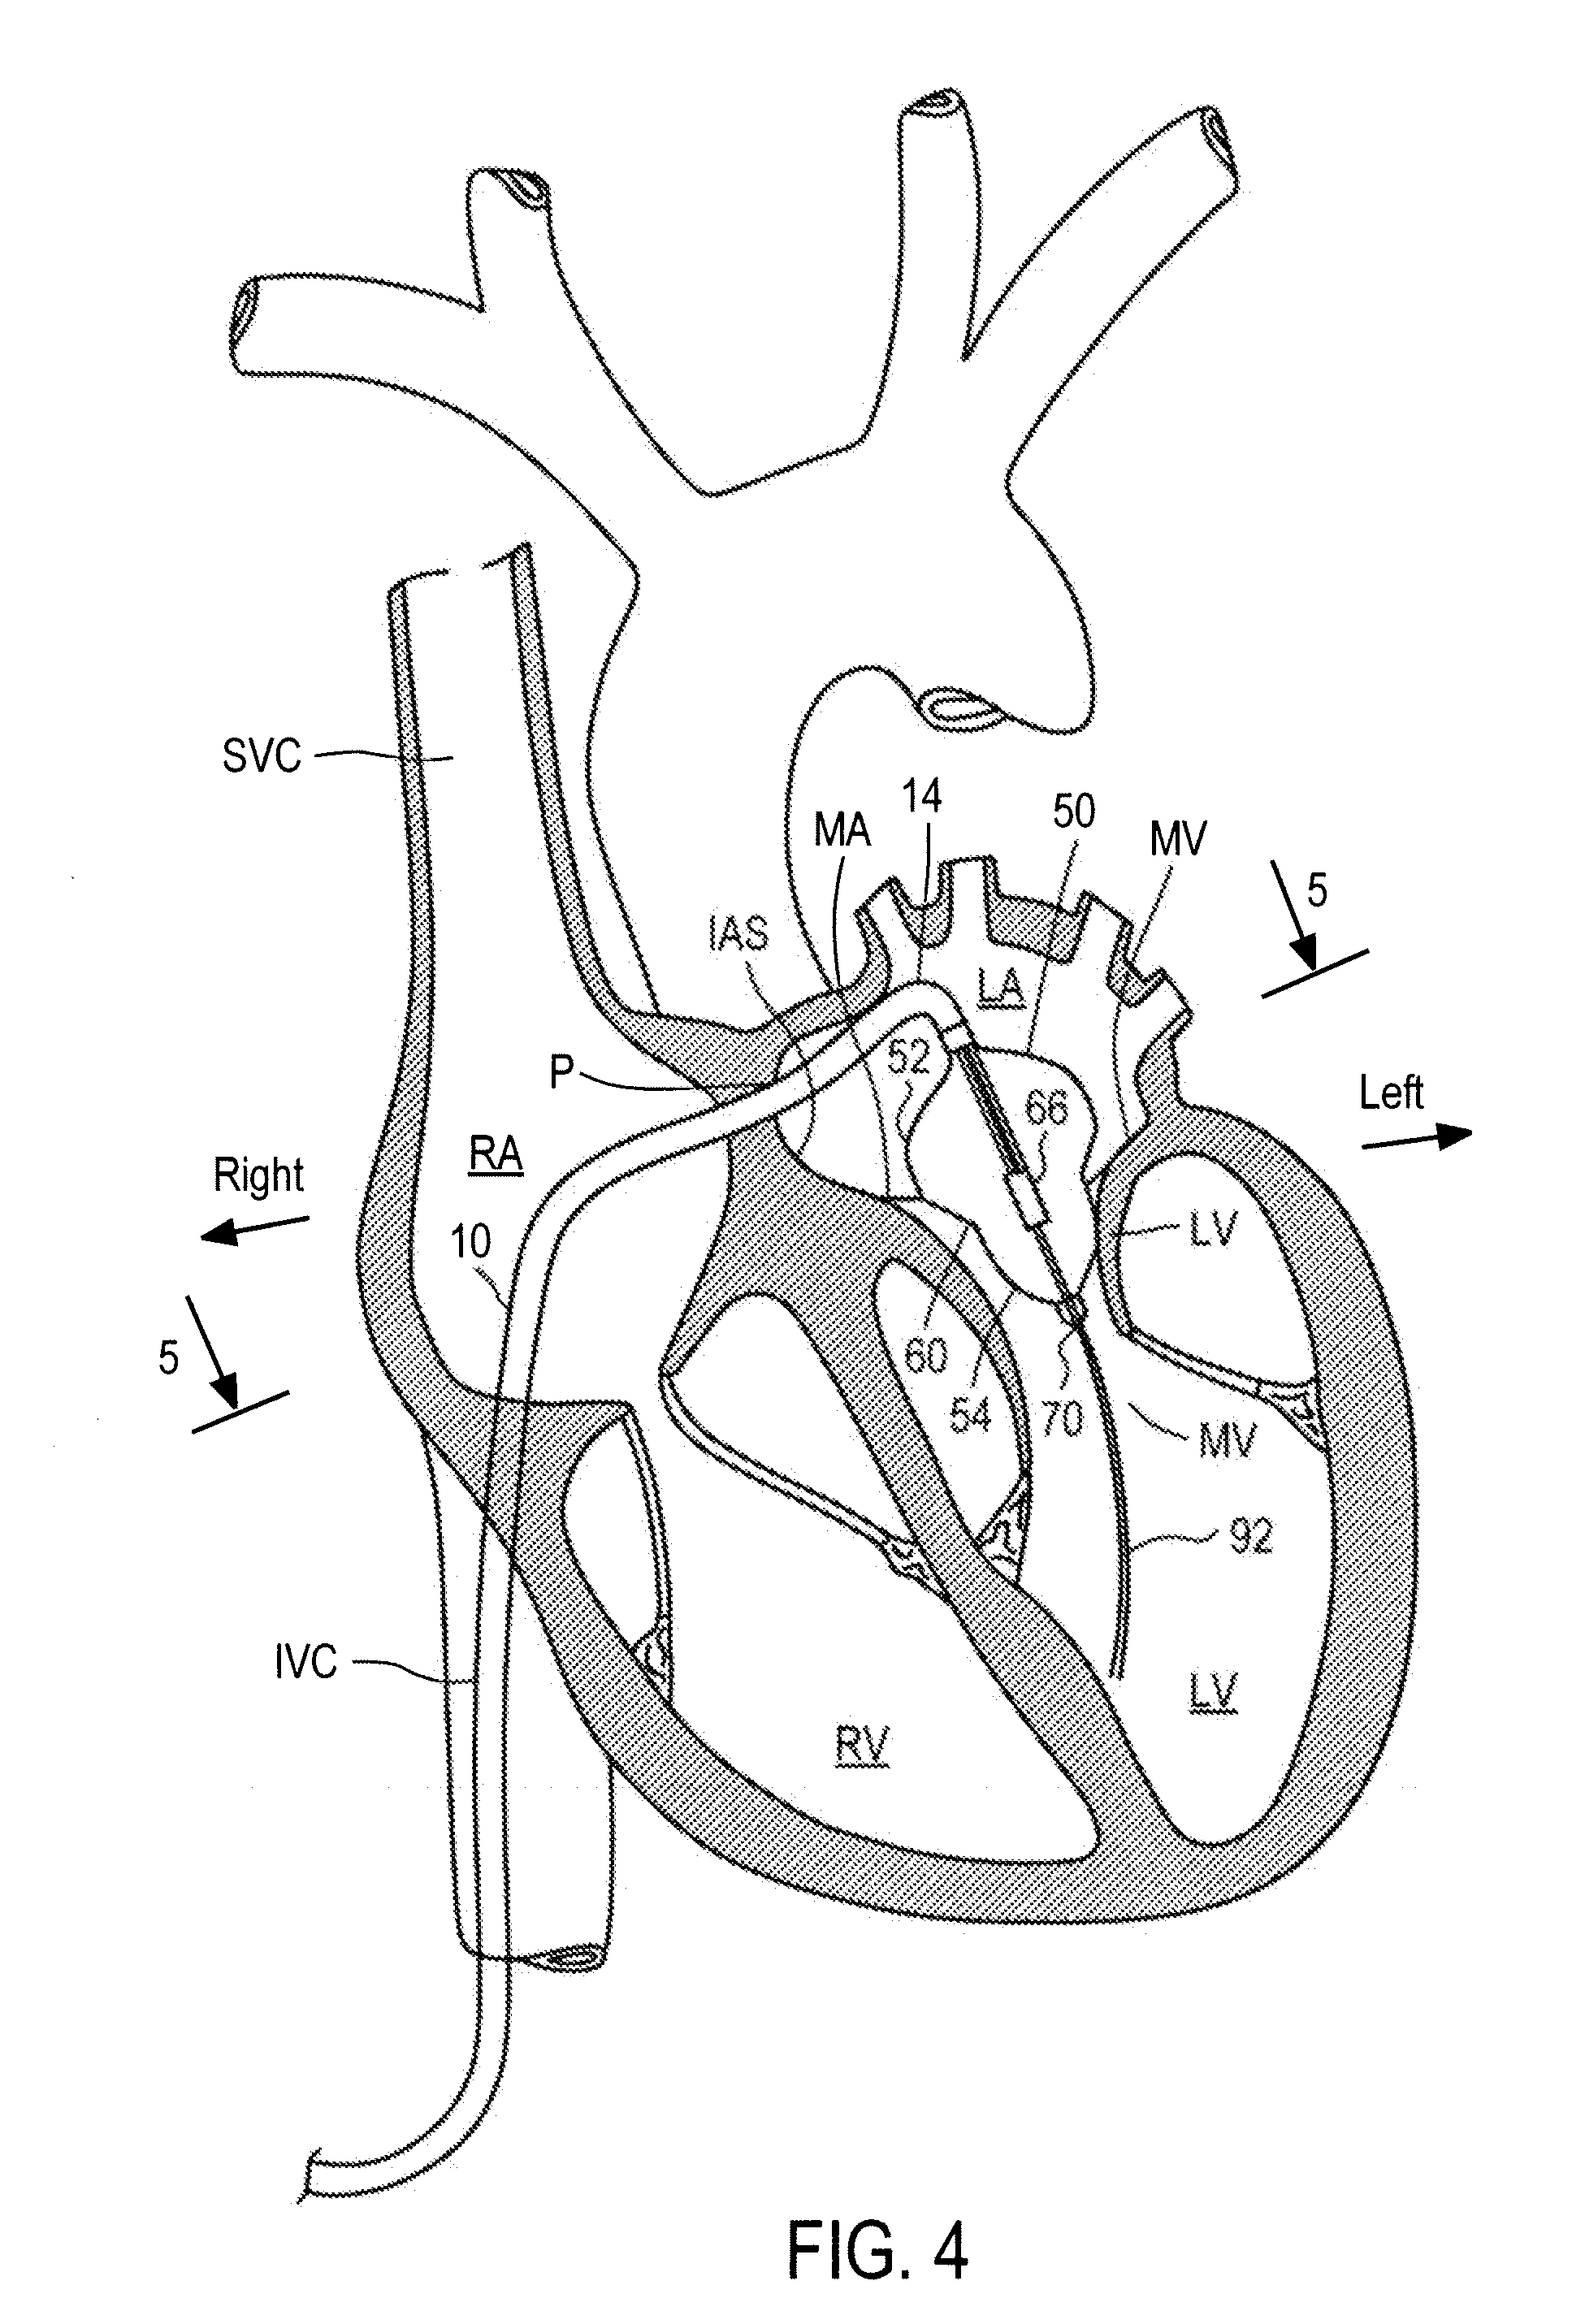 Methods and apparatus for treatment of mitral valve insufficiency